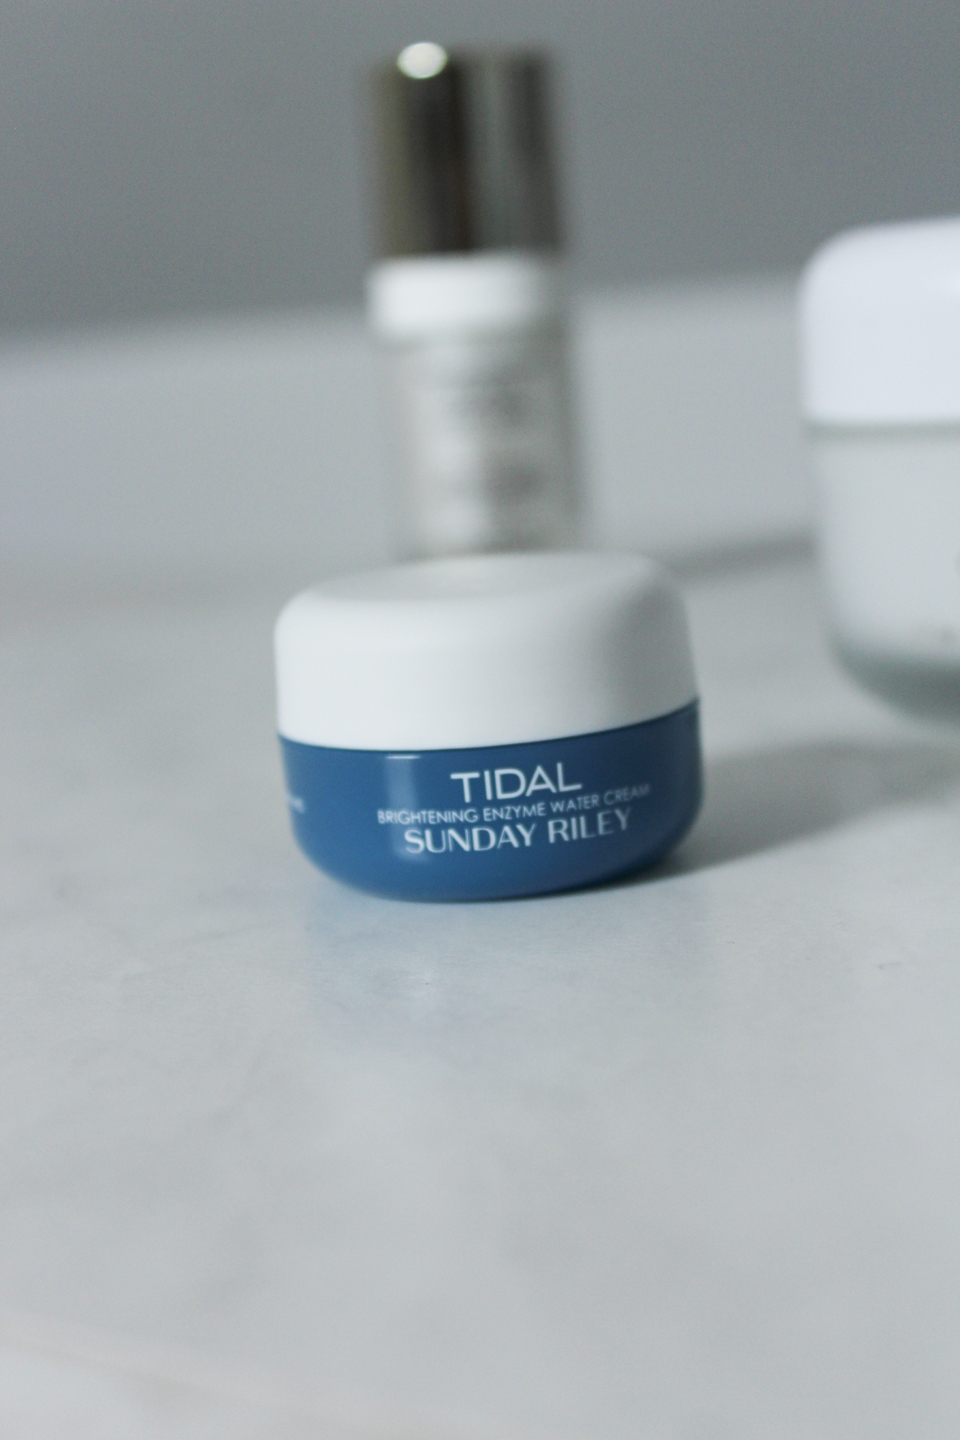 Sunday Riley Tidal Water Cream Review